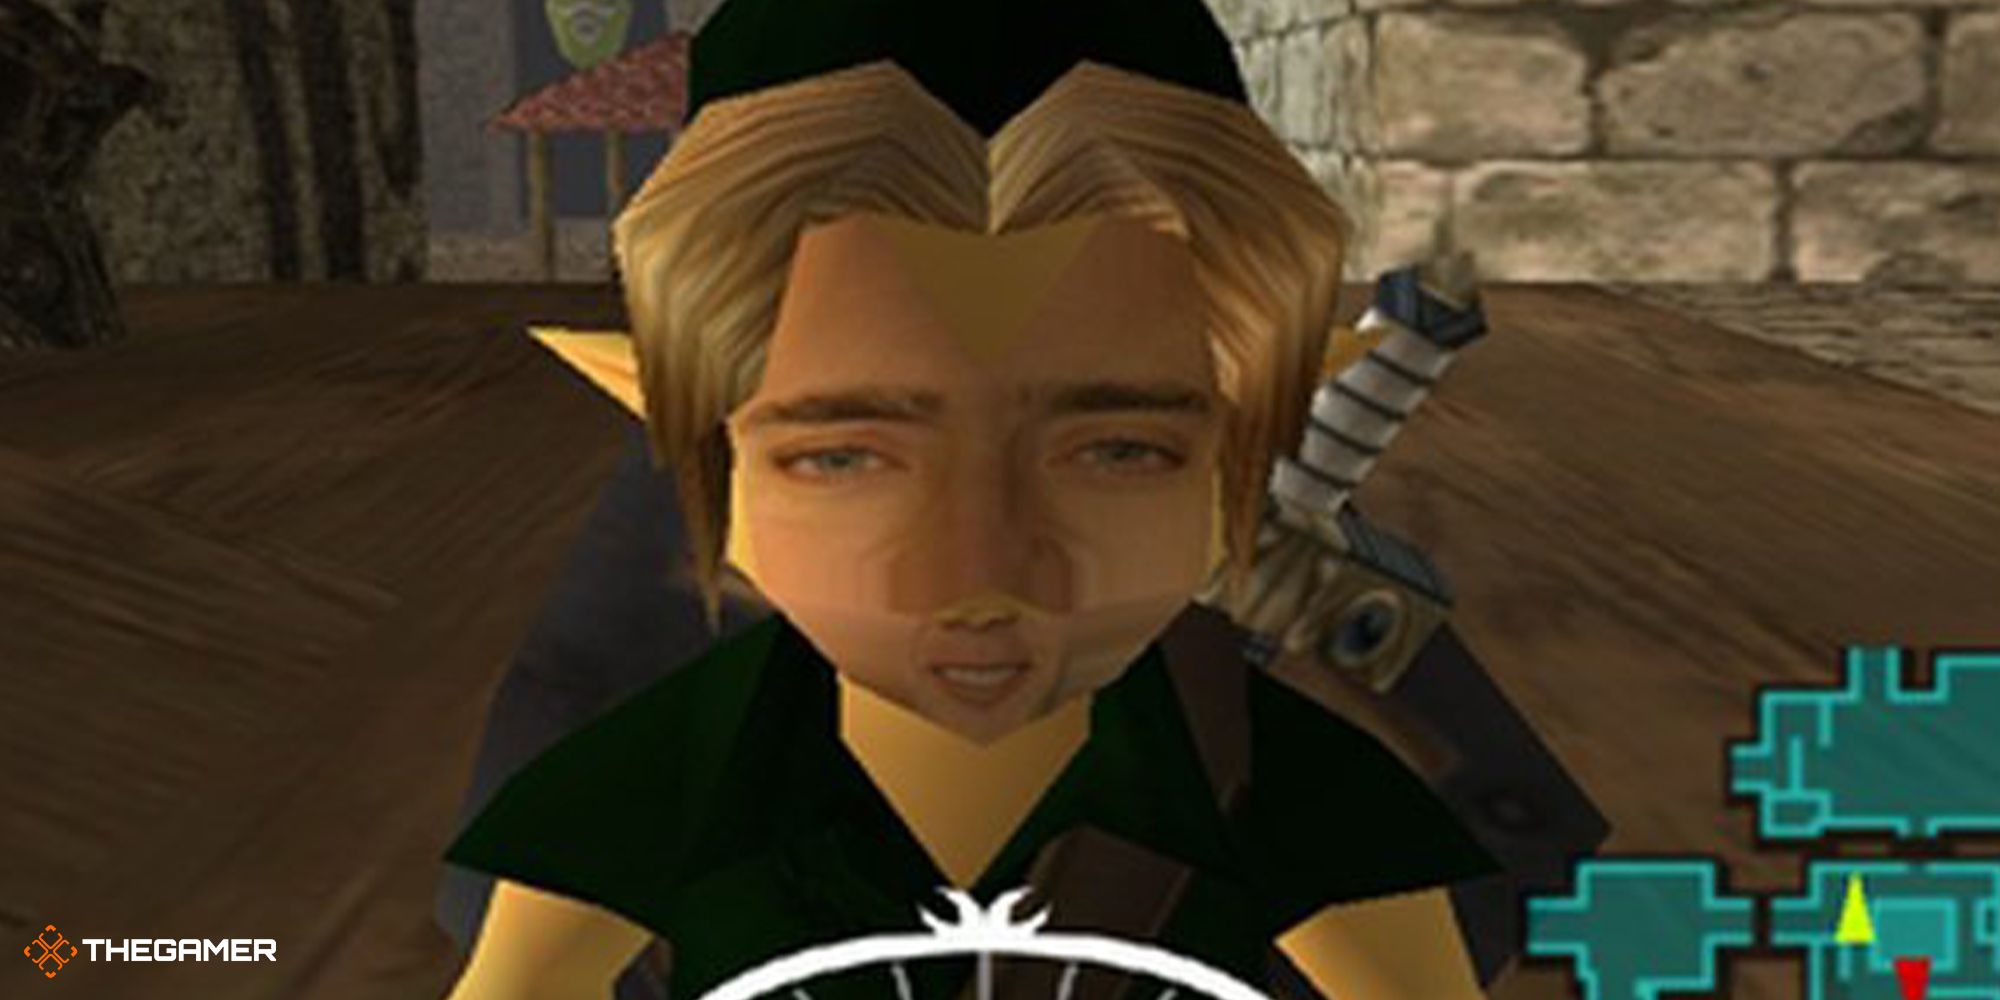 Link in Majora's Mask with a Nicholas Cage face